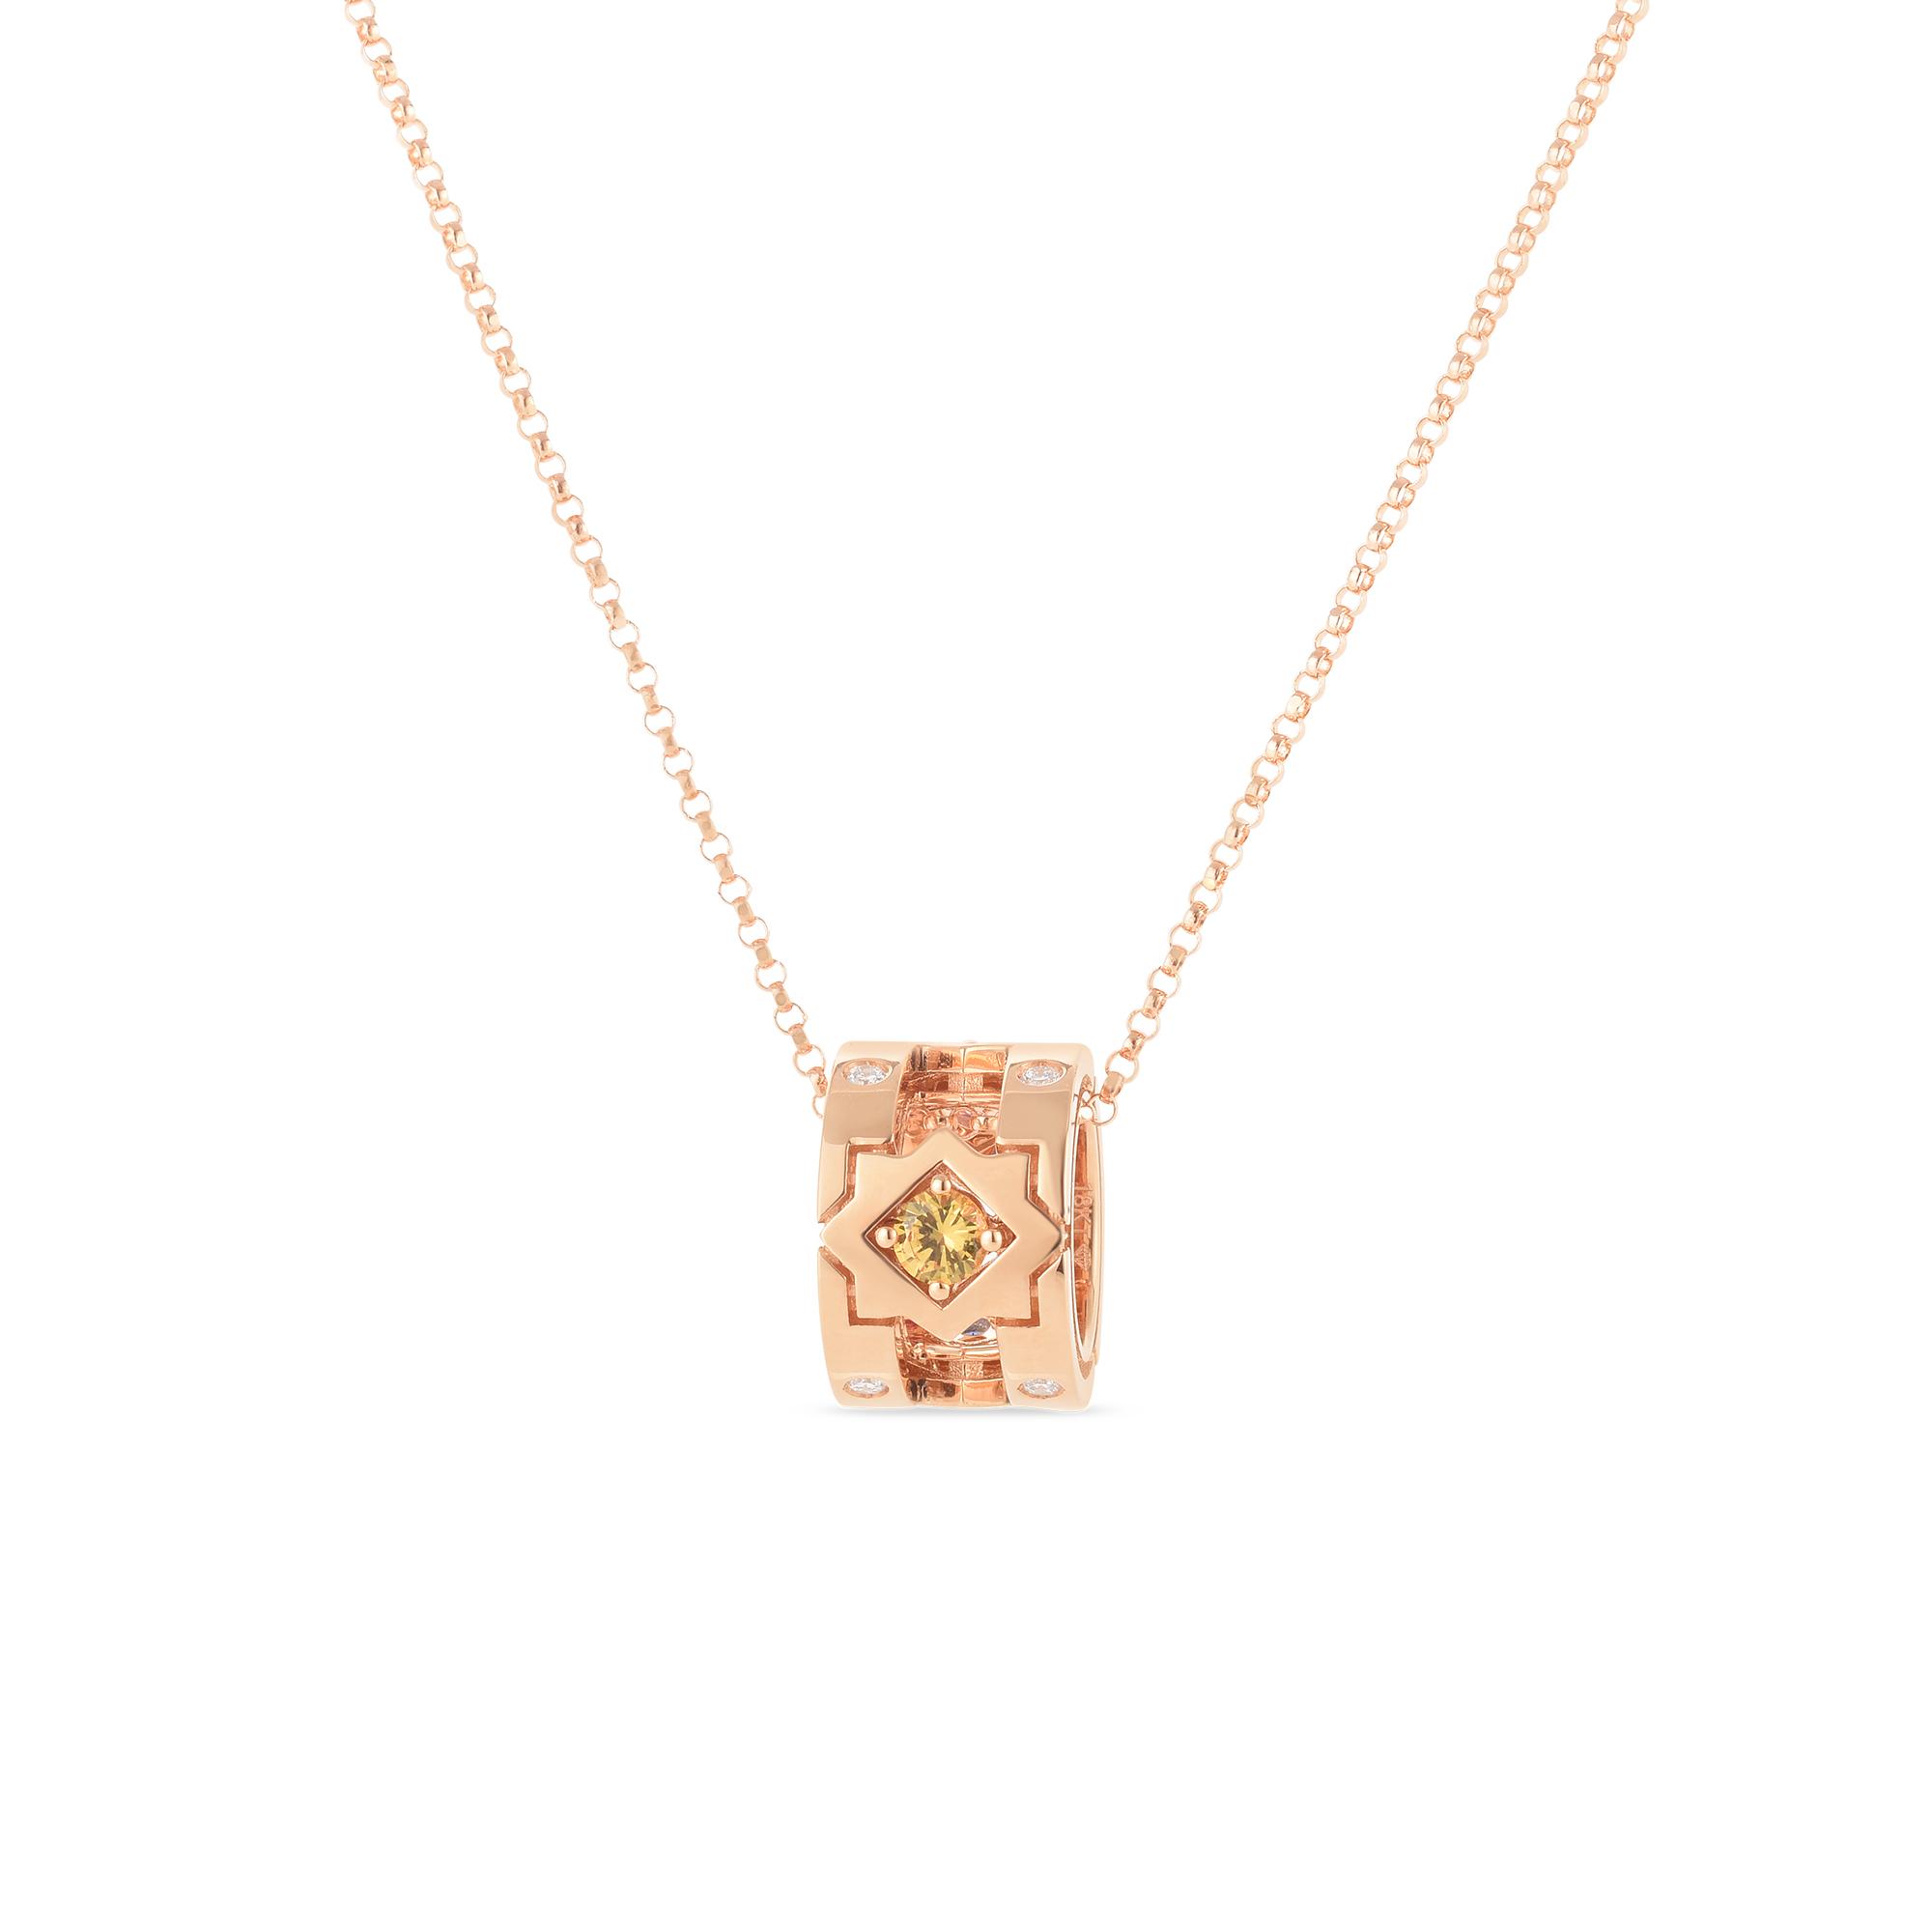 Roberto Coin Navarra Rose Gold Mixed Sapphire Pendant Necklace with Diamonds